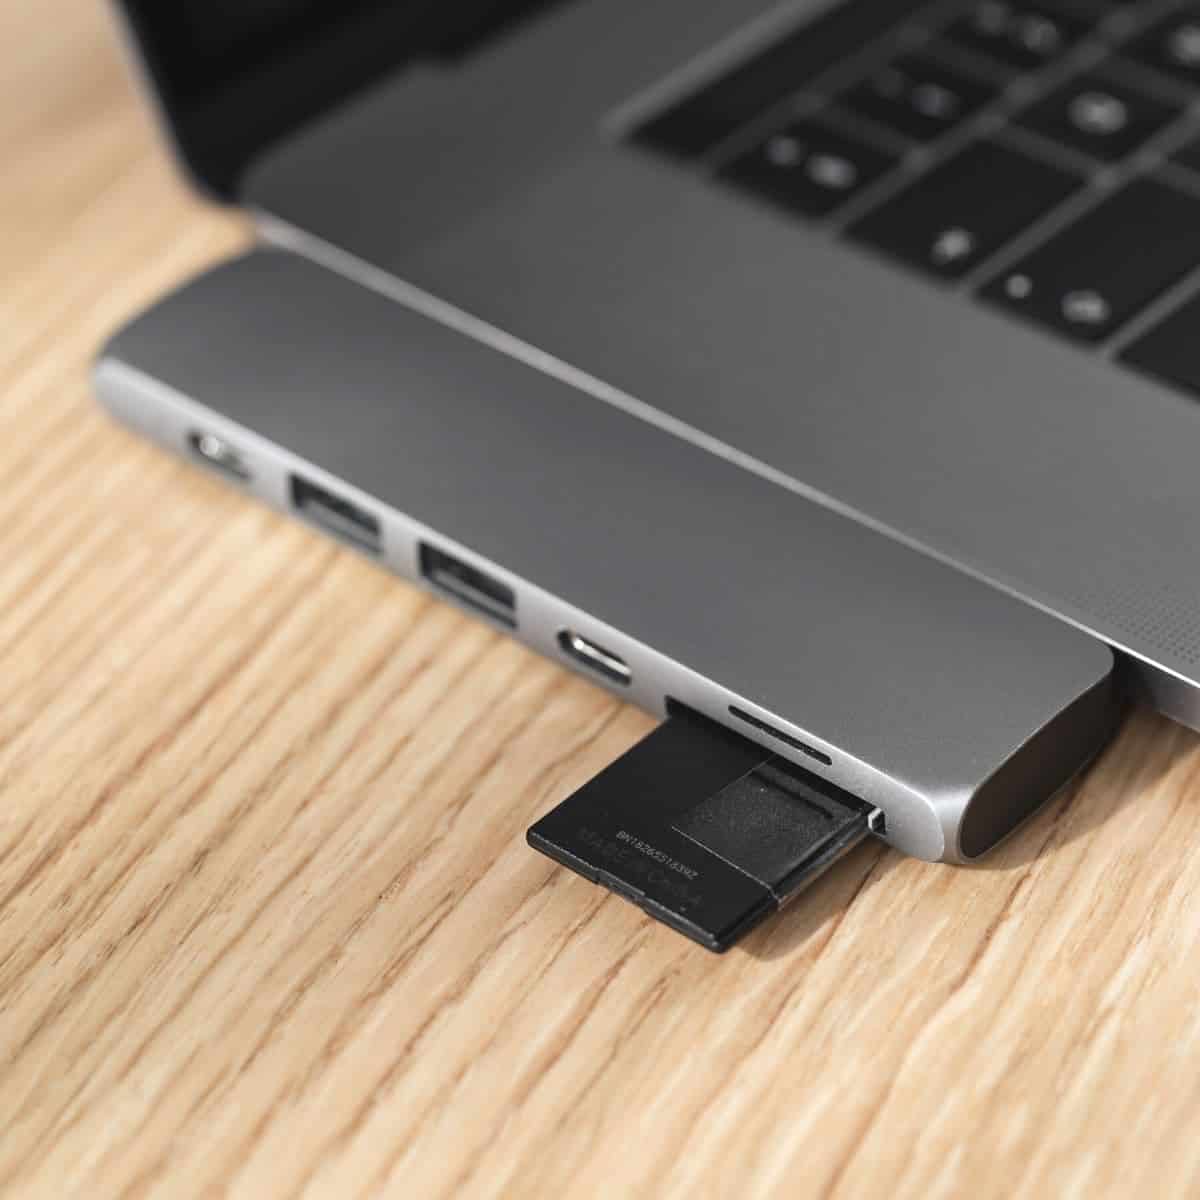 Memory card in a reader attached to a laptop on a table.